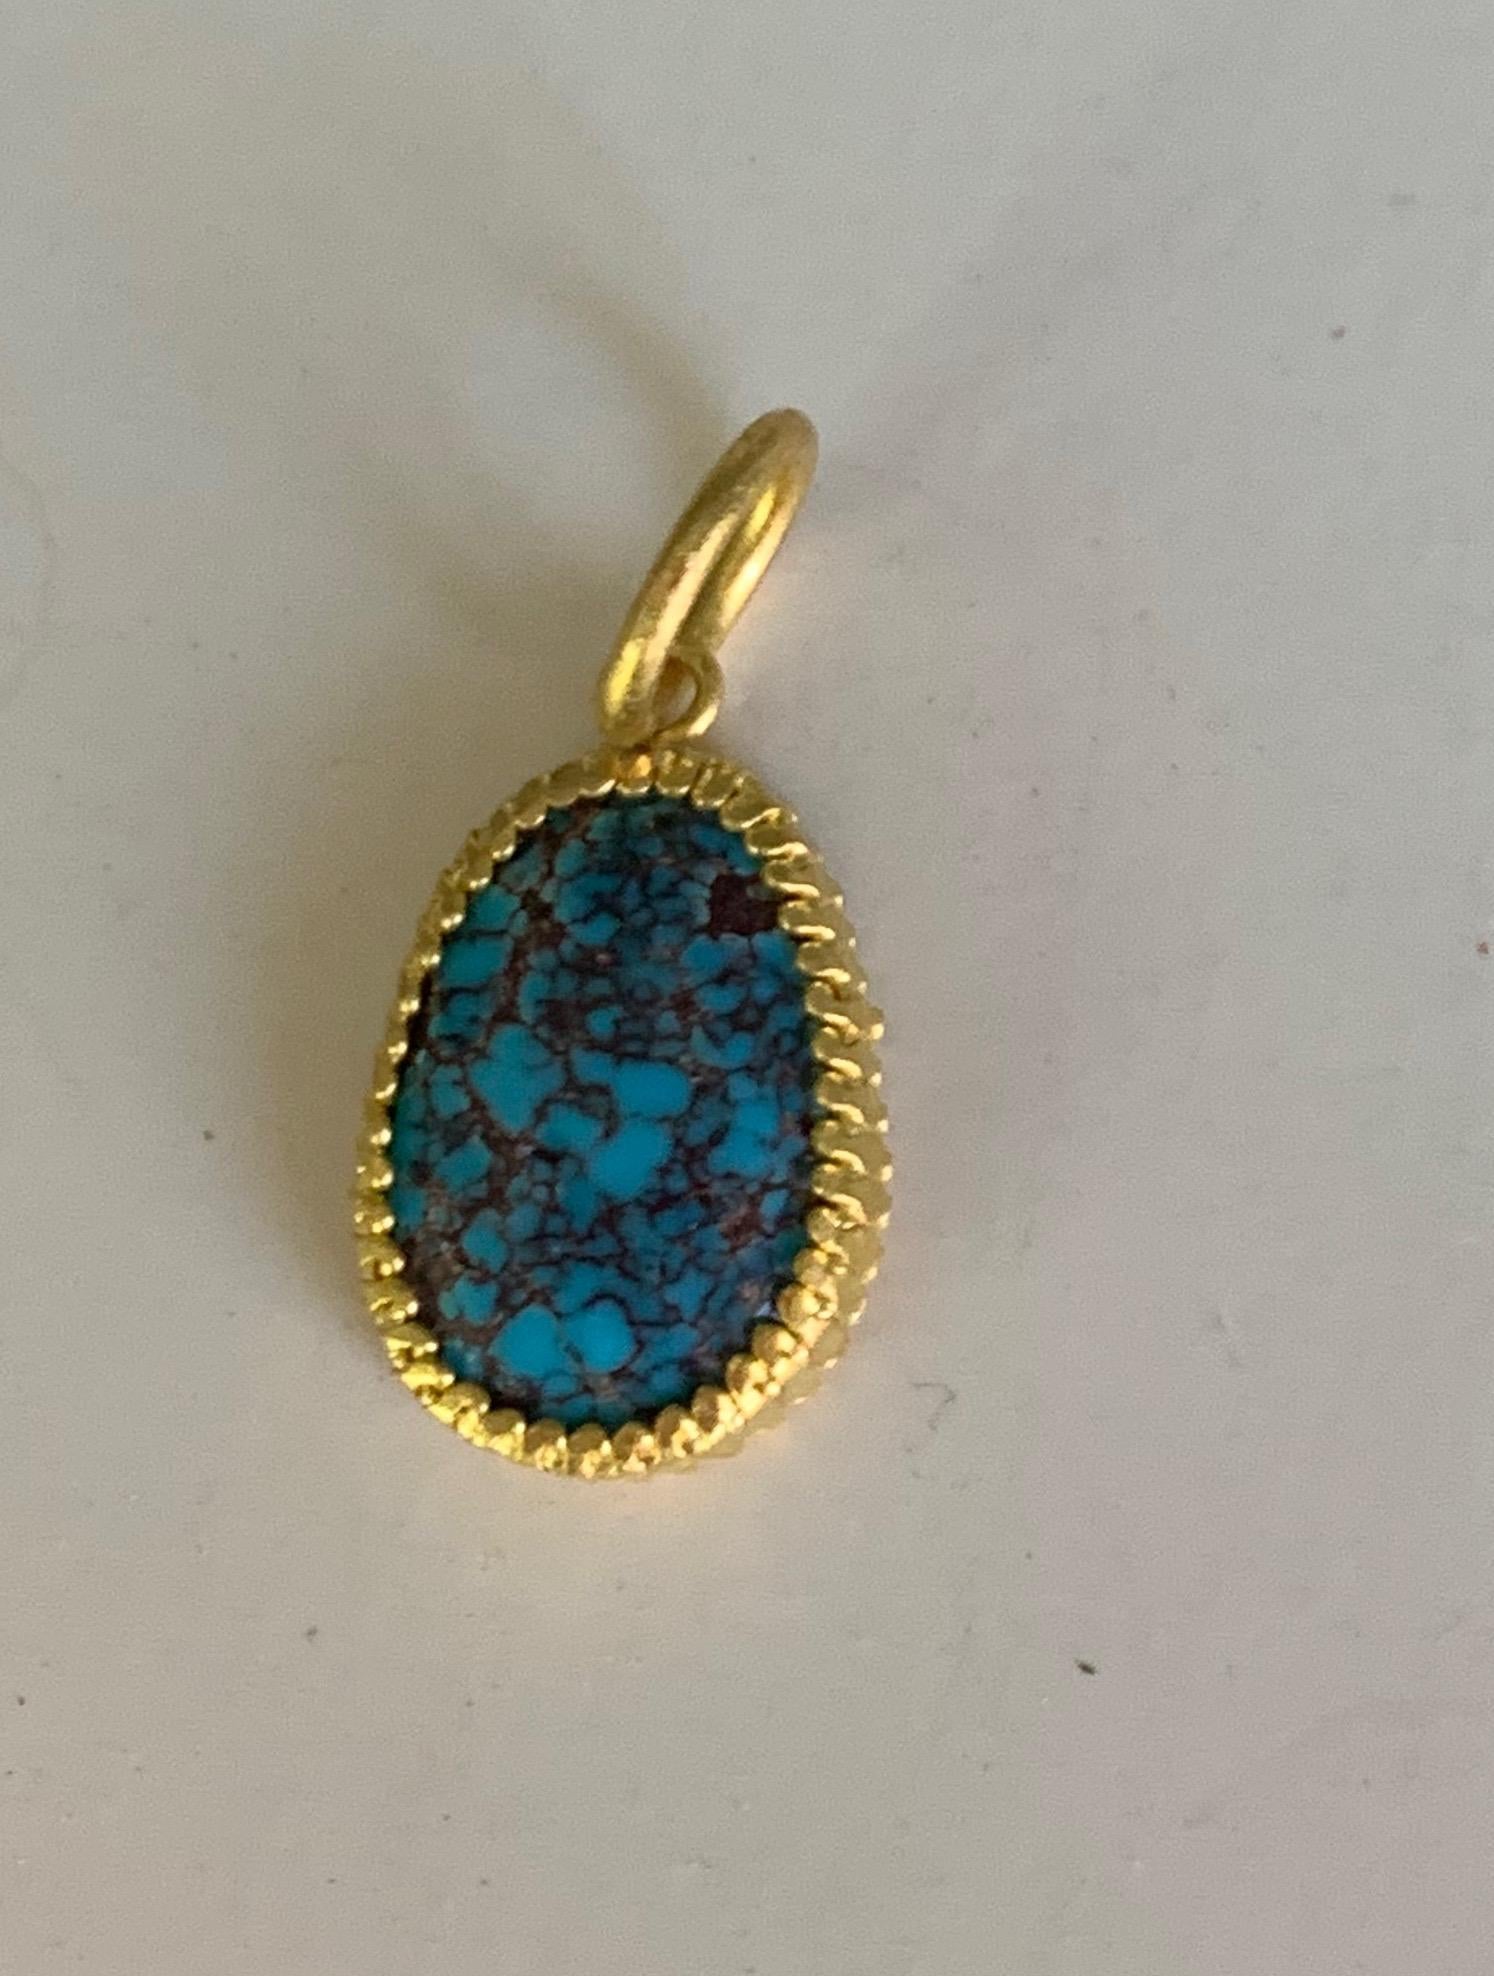 Antique Turquoise pendant et in a scalloped setting in 22 Karat gold. Lovely stand alone or included with other charms.
The pendant hangs 1 inch 1/16